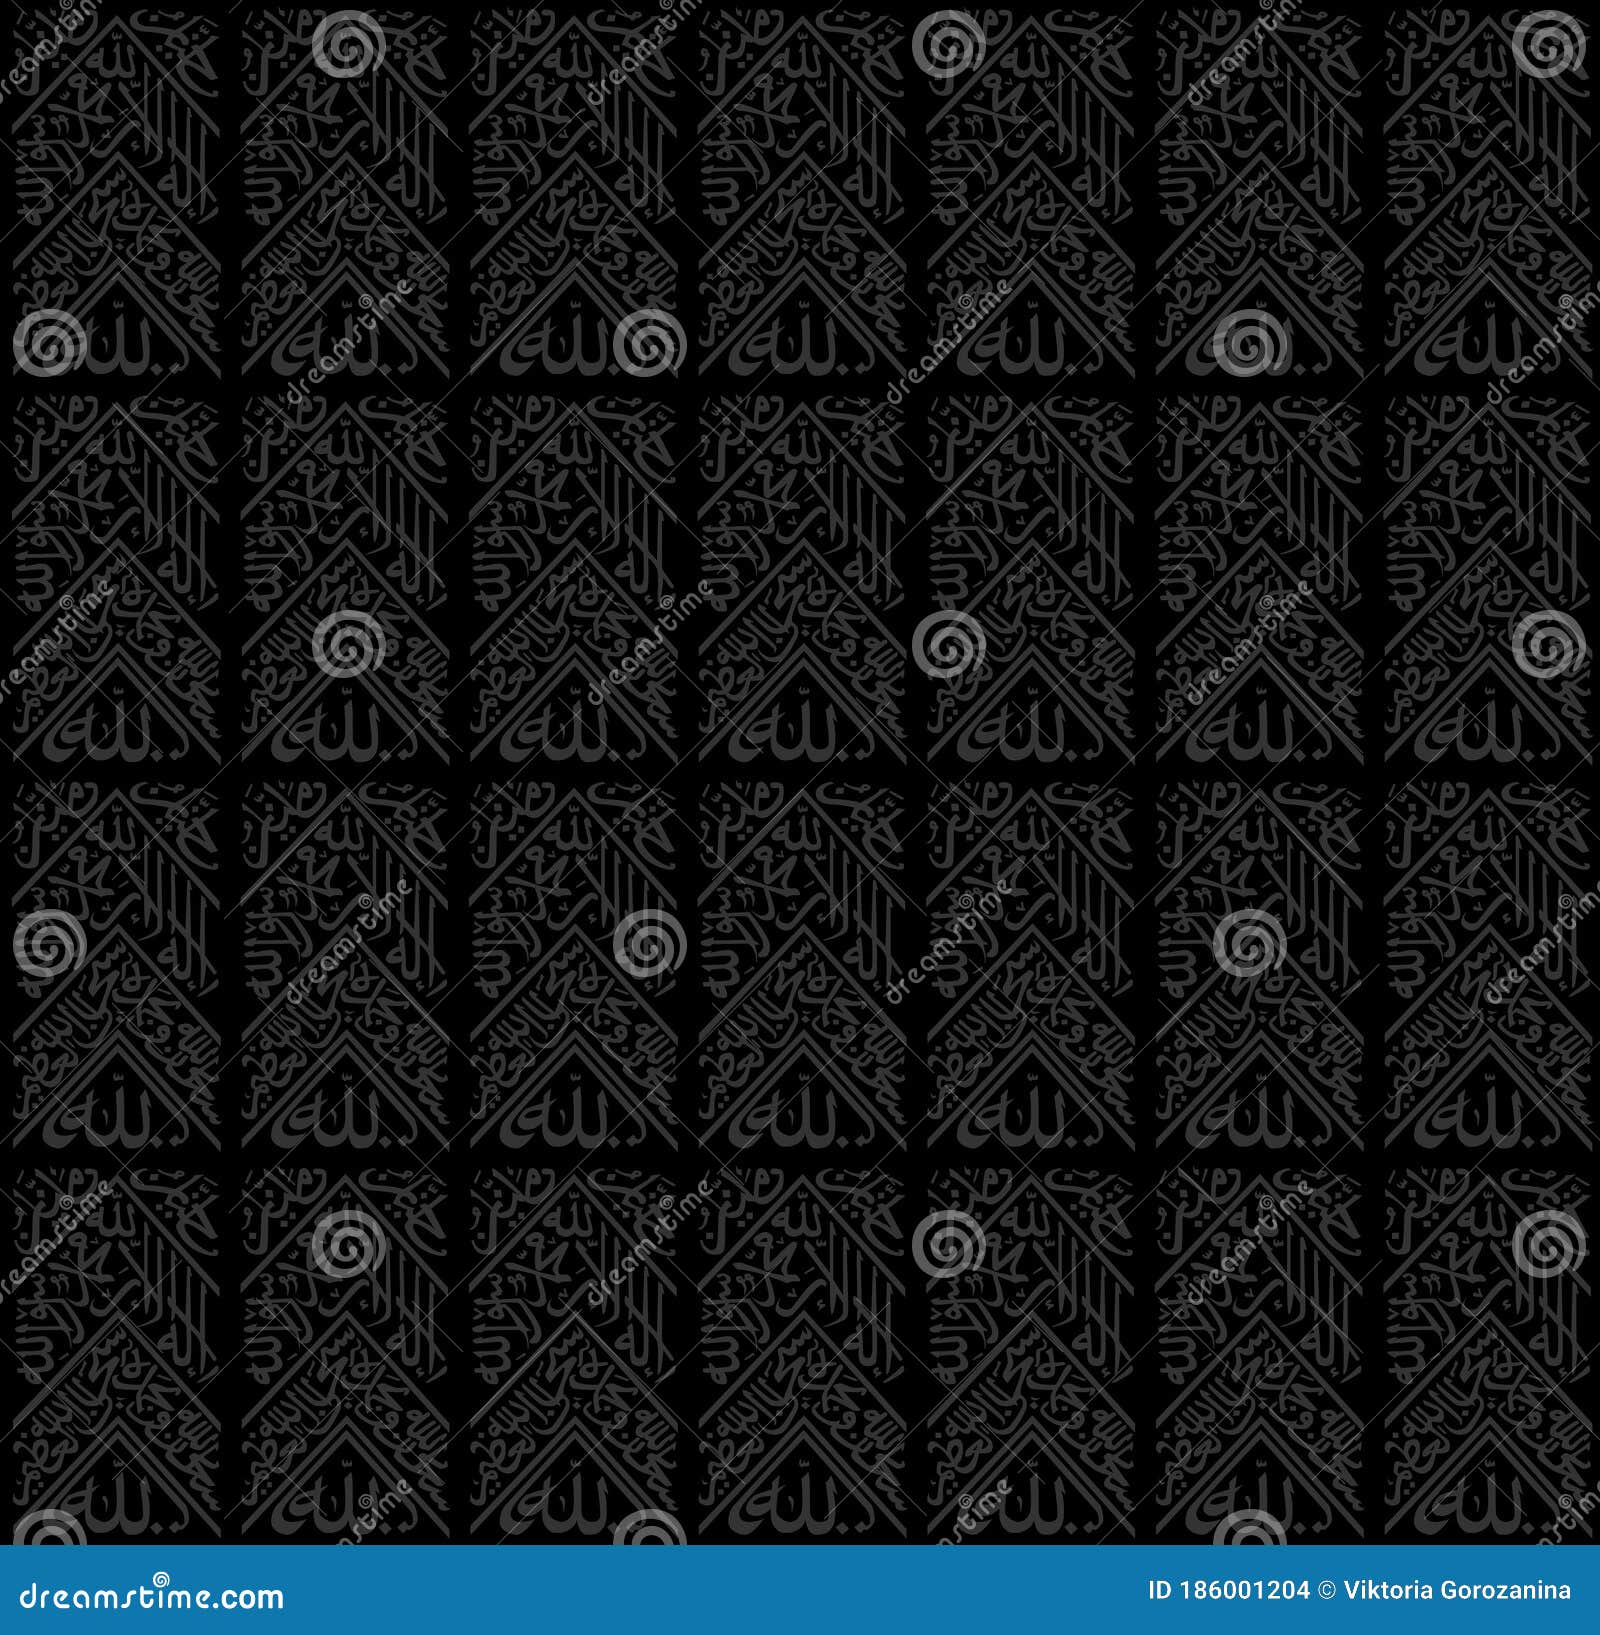 kaaba seamless pattern. hajj to mecca. kabah cover black cloth pattern. islamic background. arabic calligraphy writings texture.